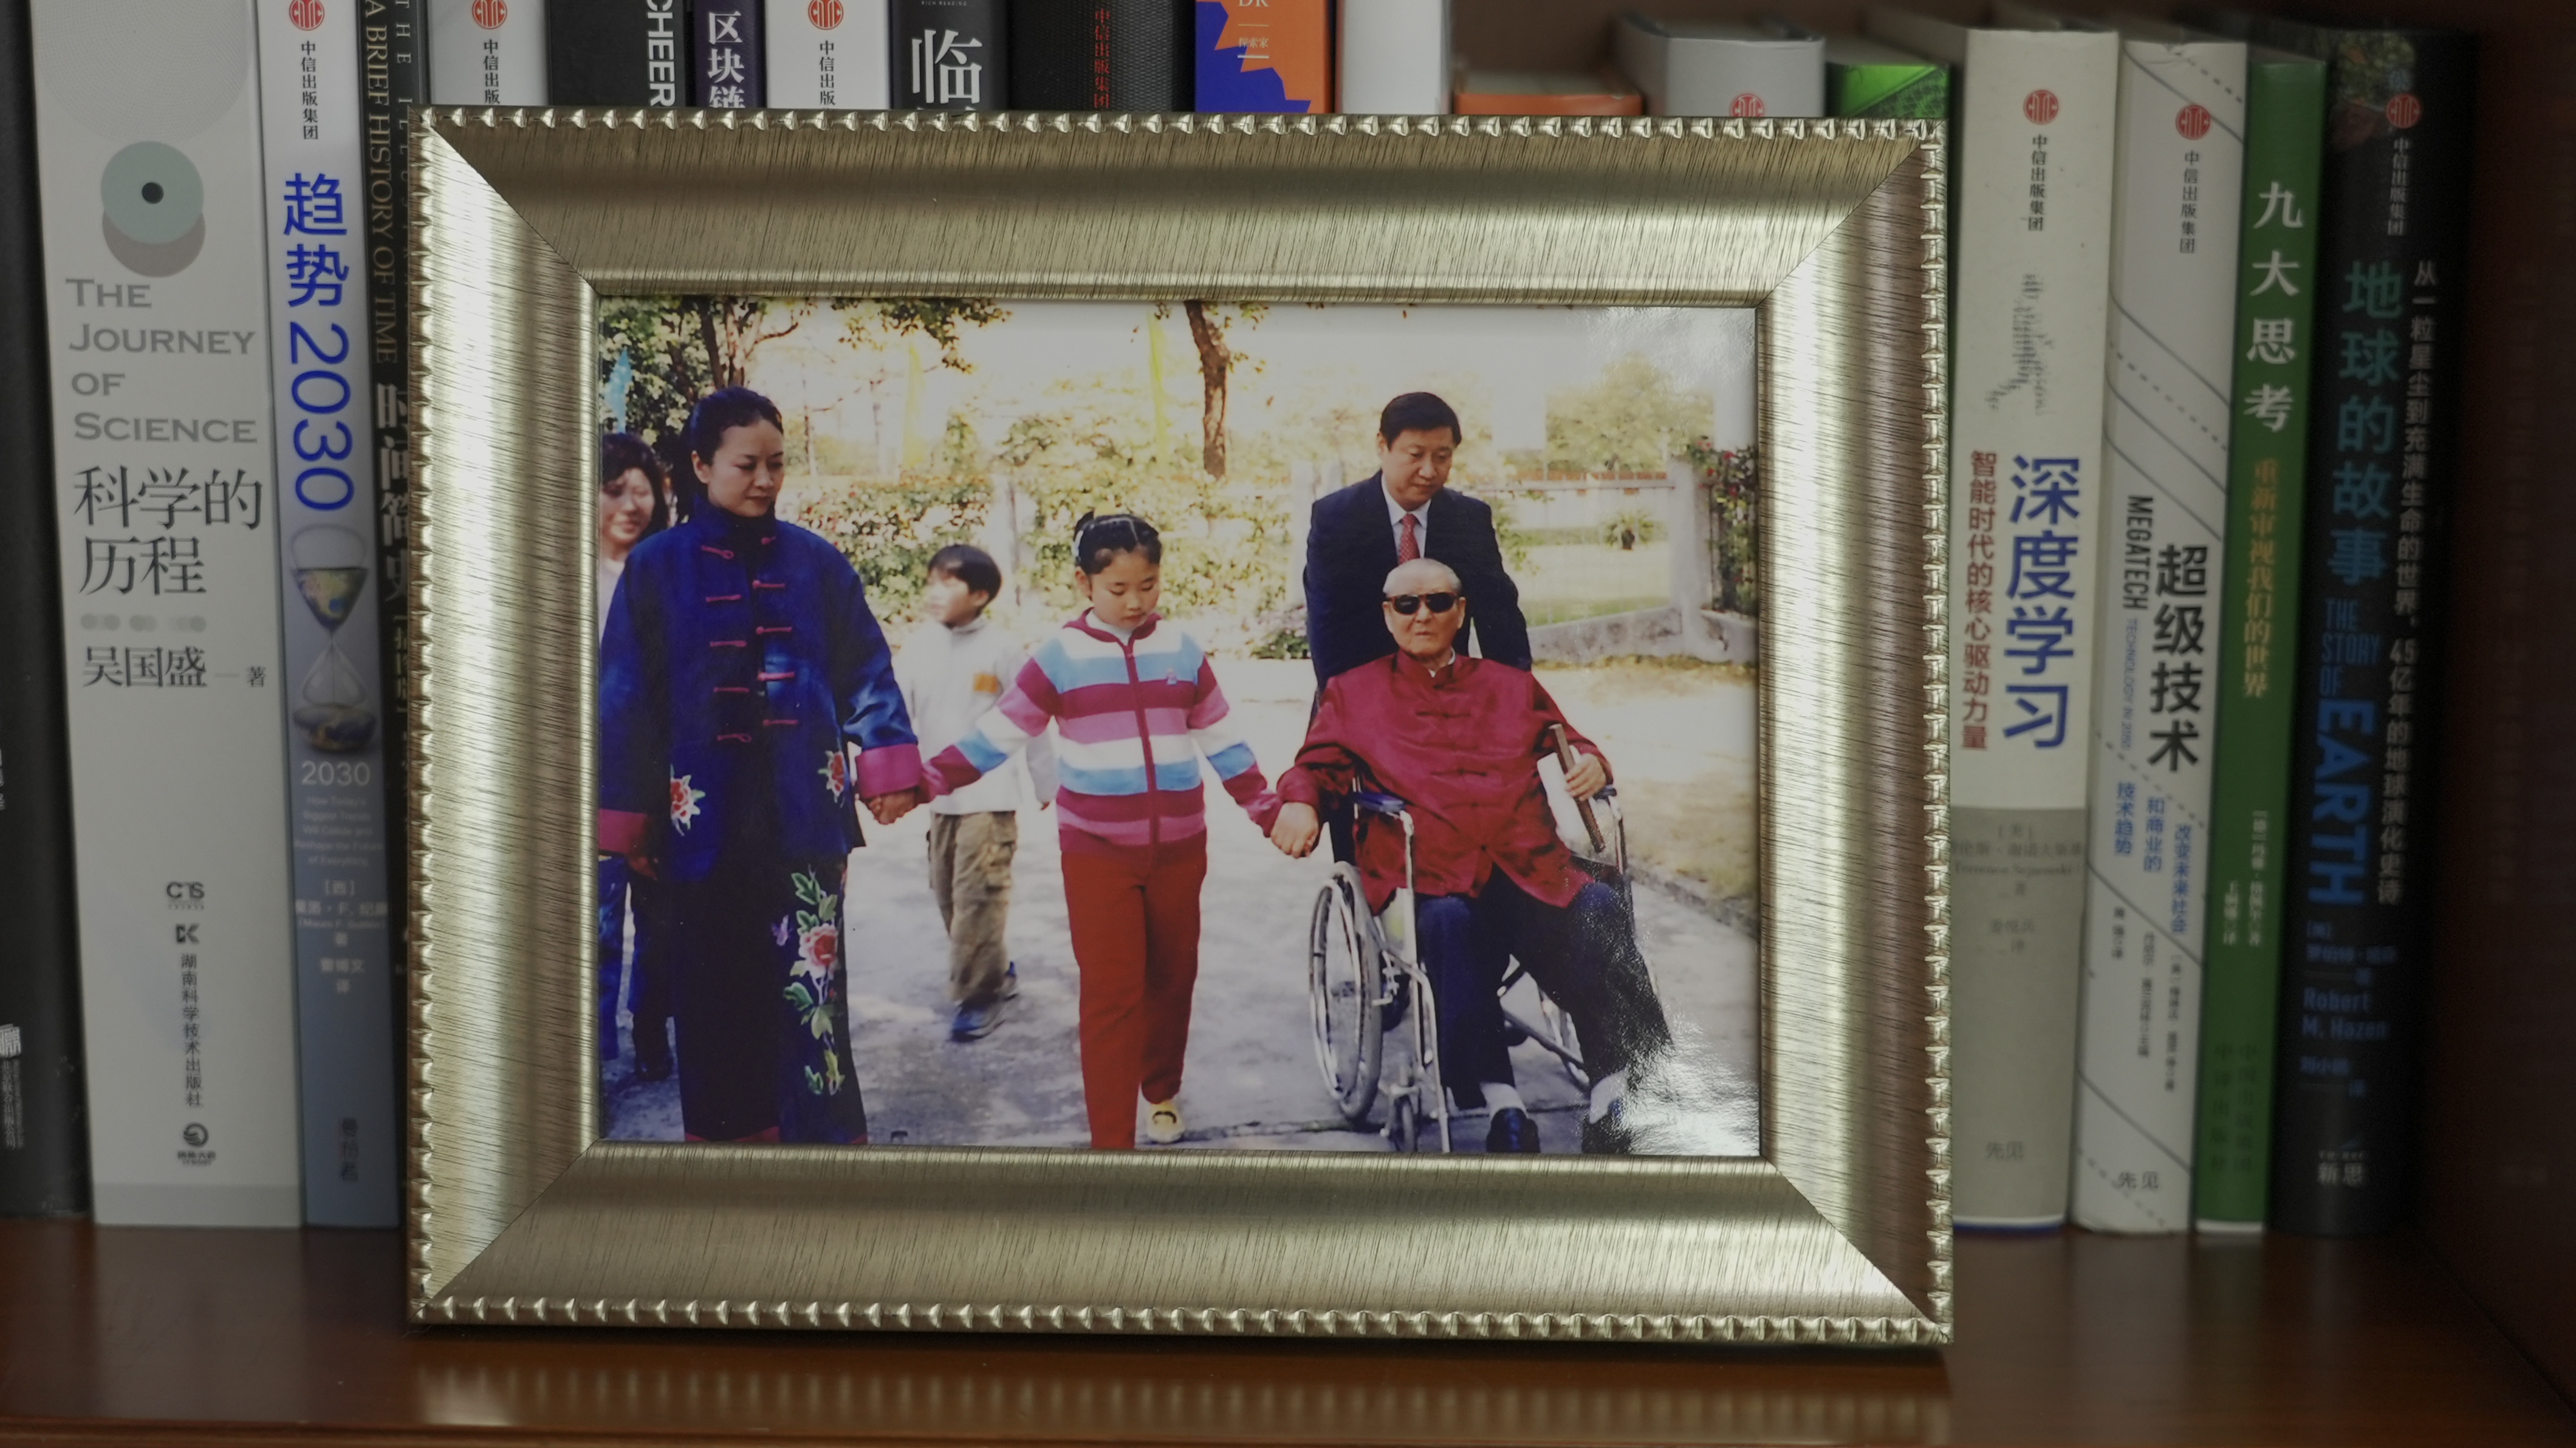 A file photo showing Xi Jinping (R, back) with his father Xi Zhongxun (R, front), his wife (L, front) and his daughter (C, front). /CMG